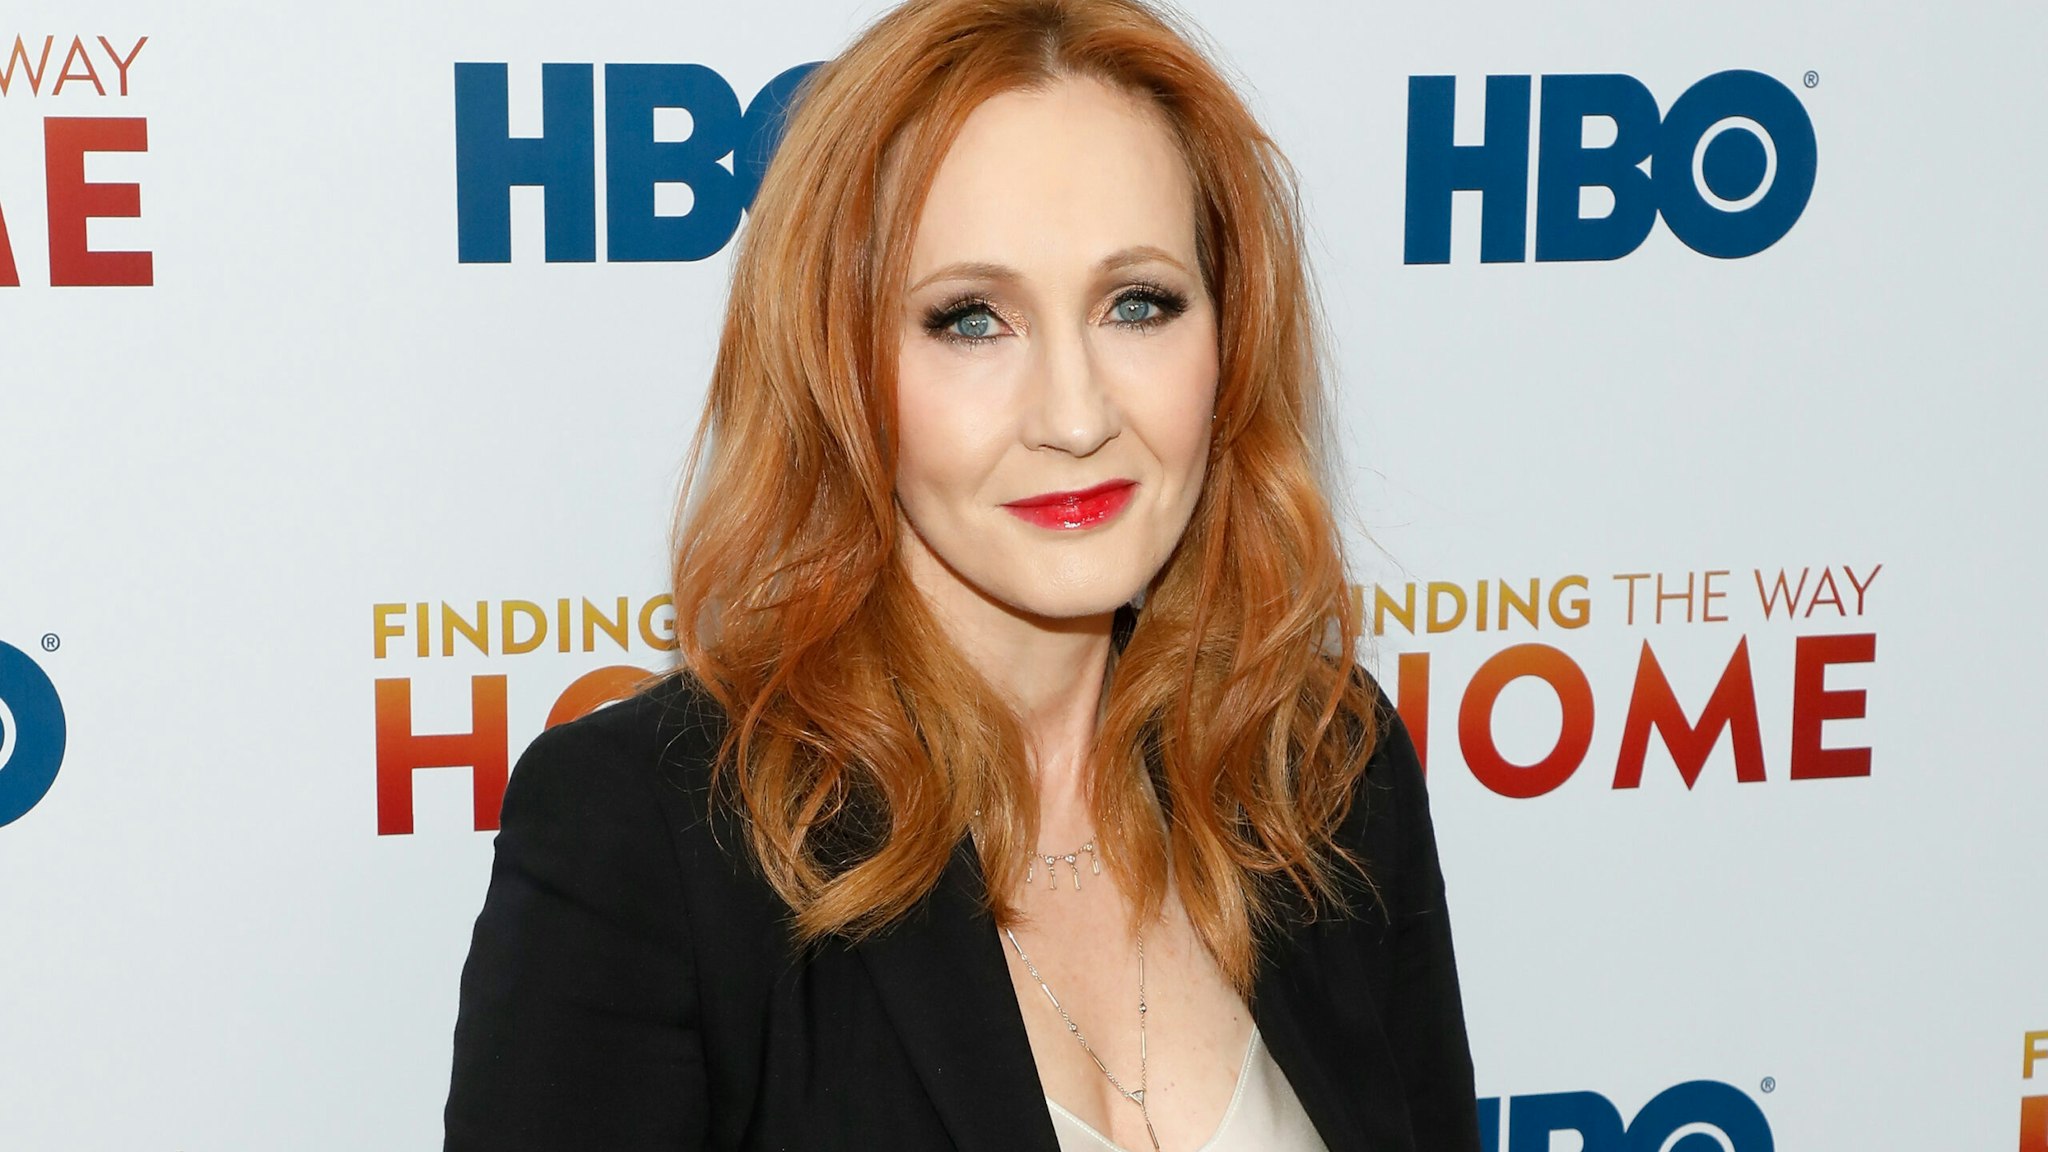 NEW YORK, NEW YORK - DECEMBER 11: J.K. Rowling attends the premiere of "Finding the Way Home" at Hudson Yards on December 11, 2019 in New York City. (Photo by Taylor Hill/FilmMagic)